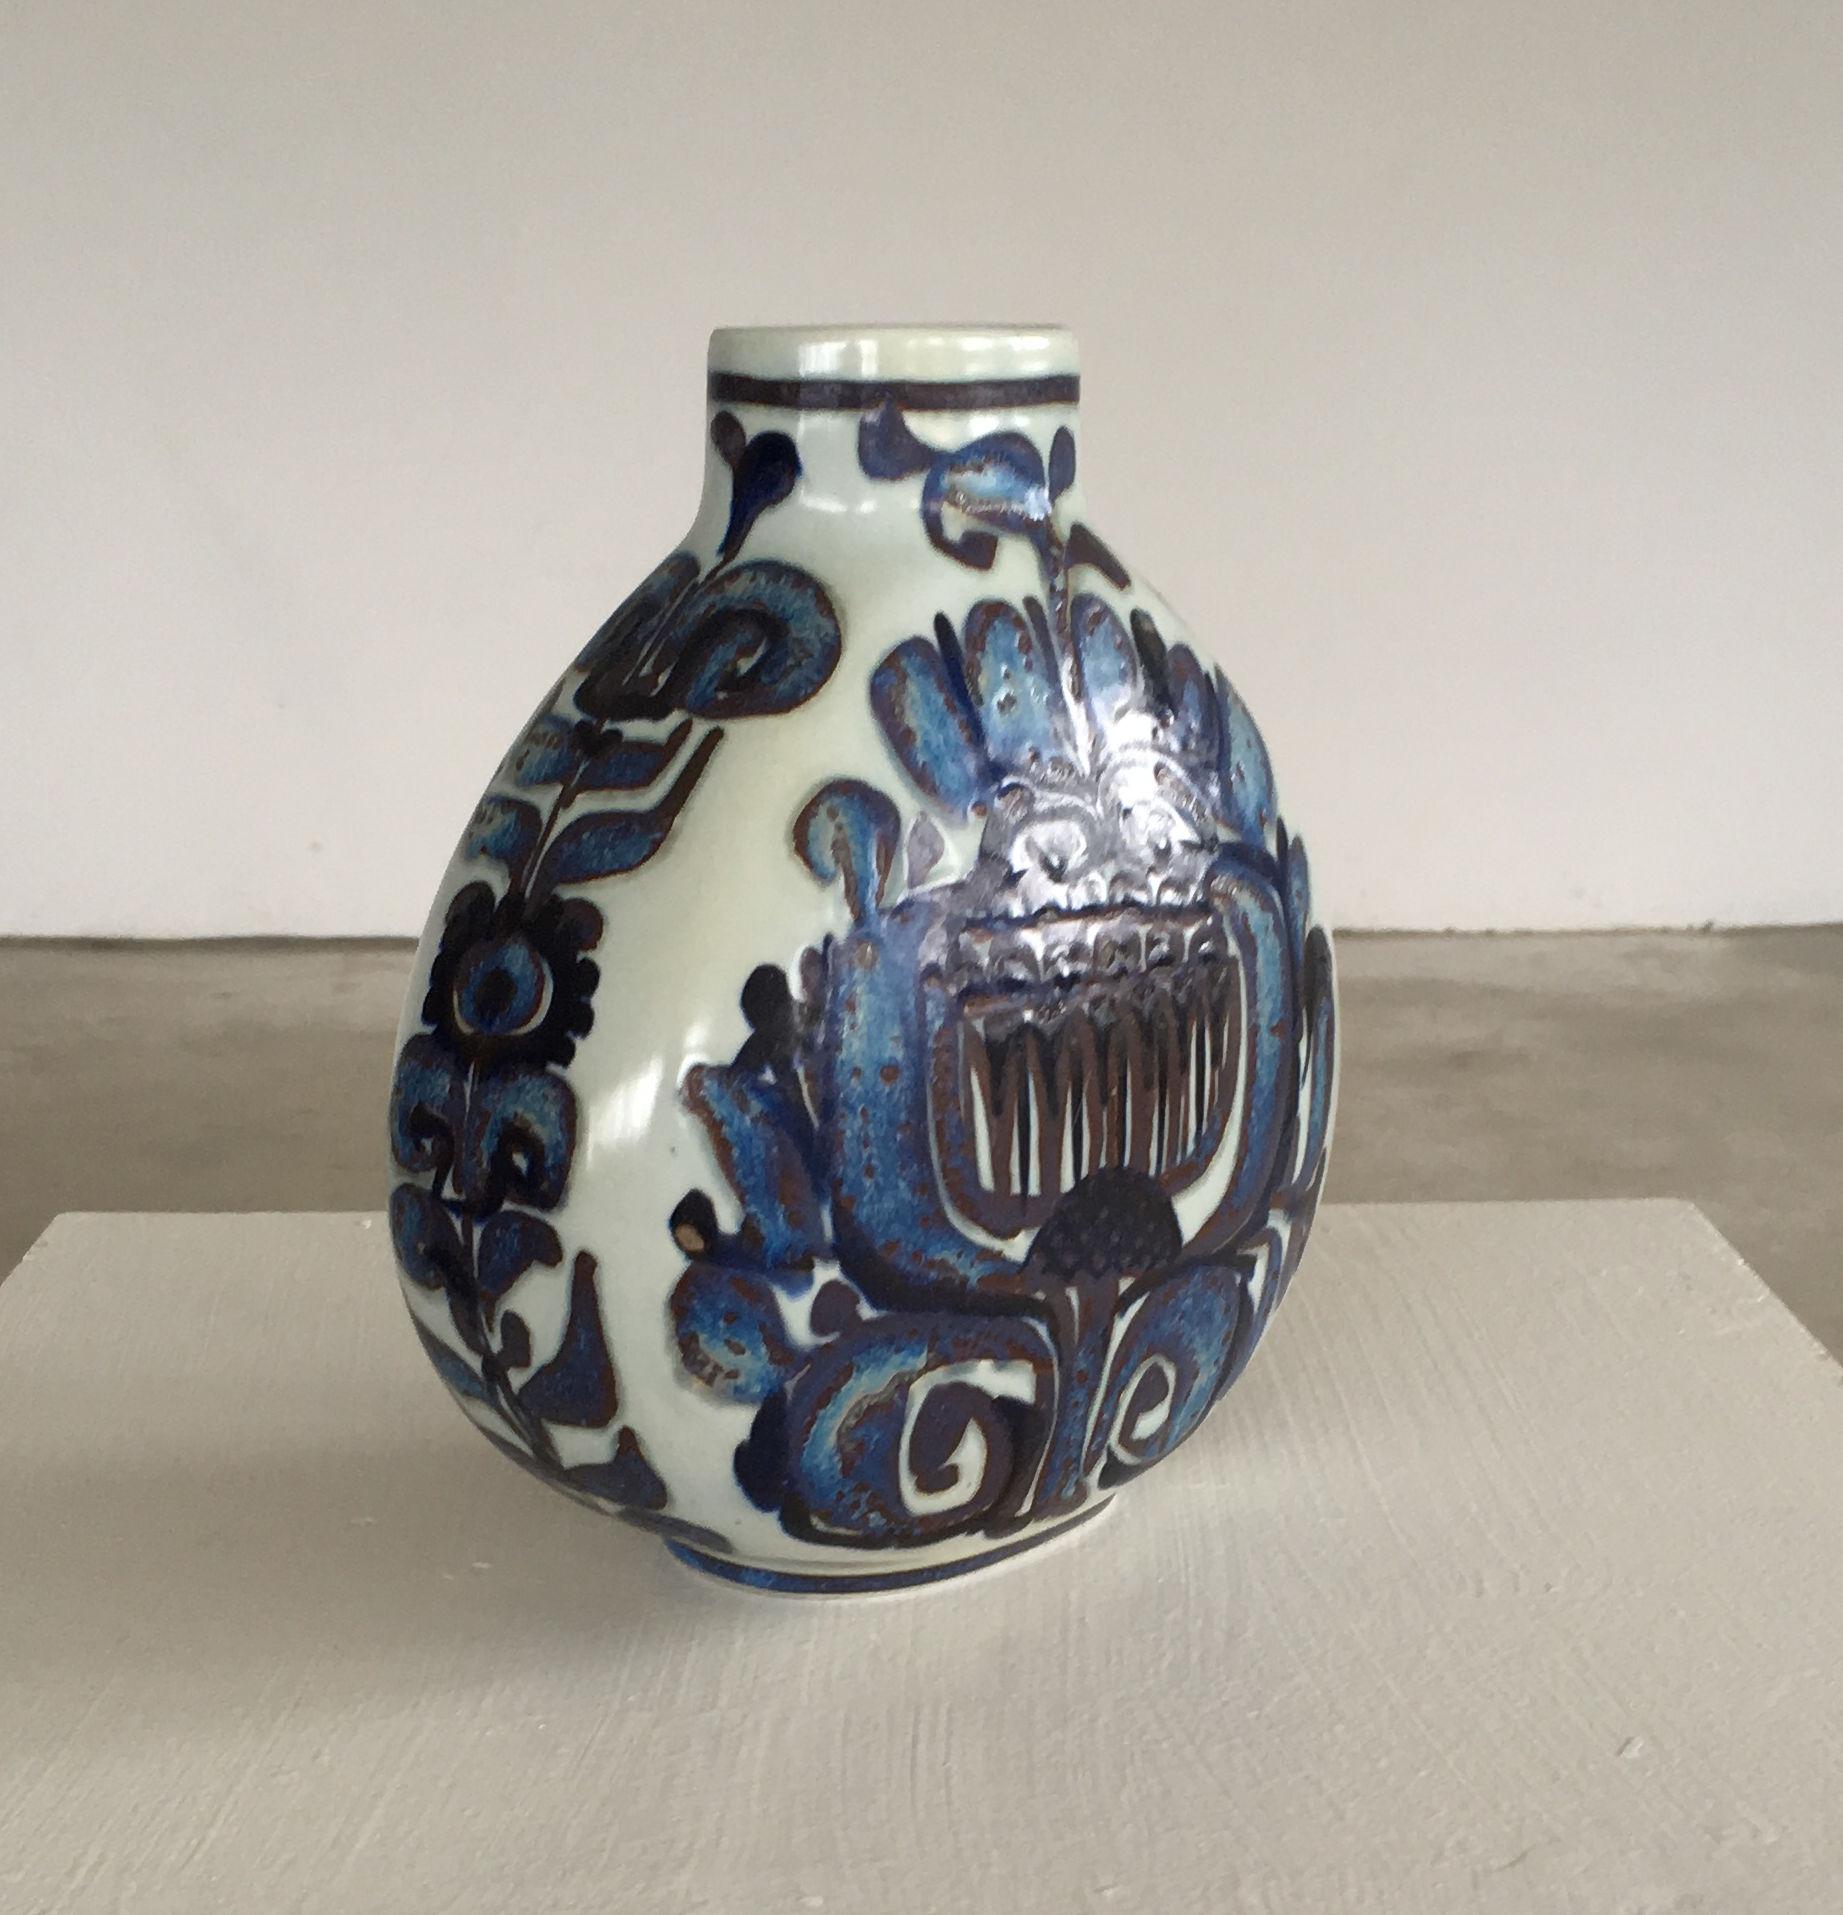 1960s Kari Christensen, Danish floral decoration bottle vase, Royal Copenhagen Aluminia

Mid-Century Modern faience bottle vase in good condition designed by Kari Christensen with blue and purple glaze and 1960s abstract floral decoration style.